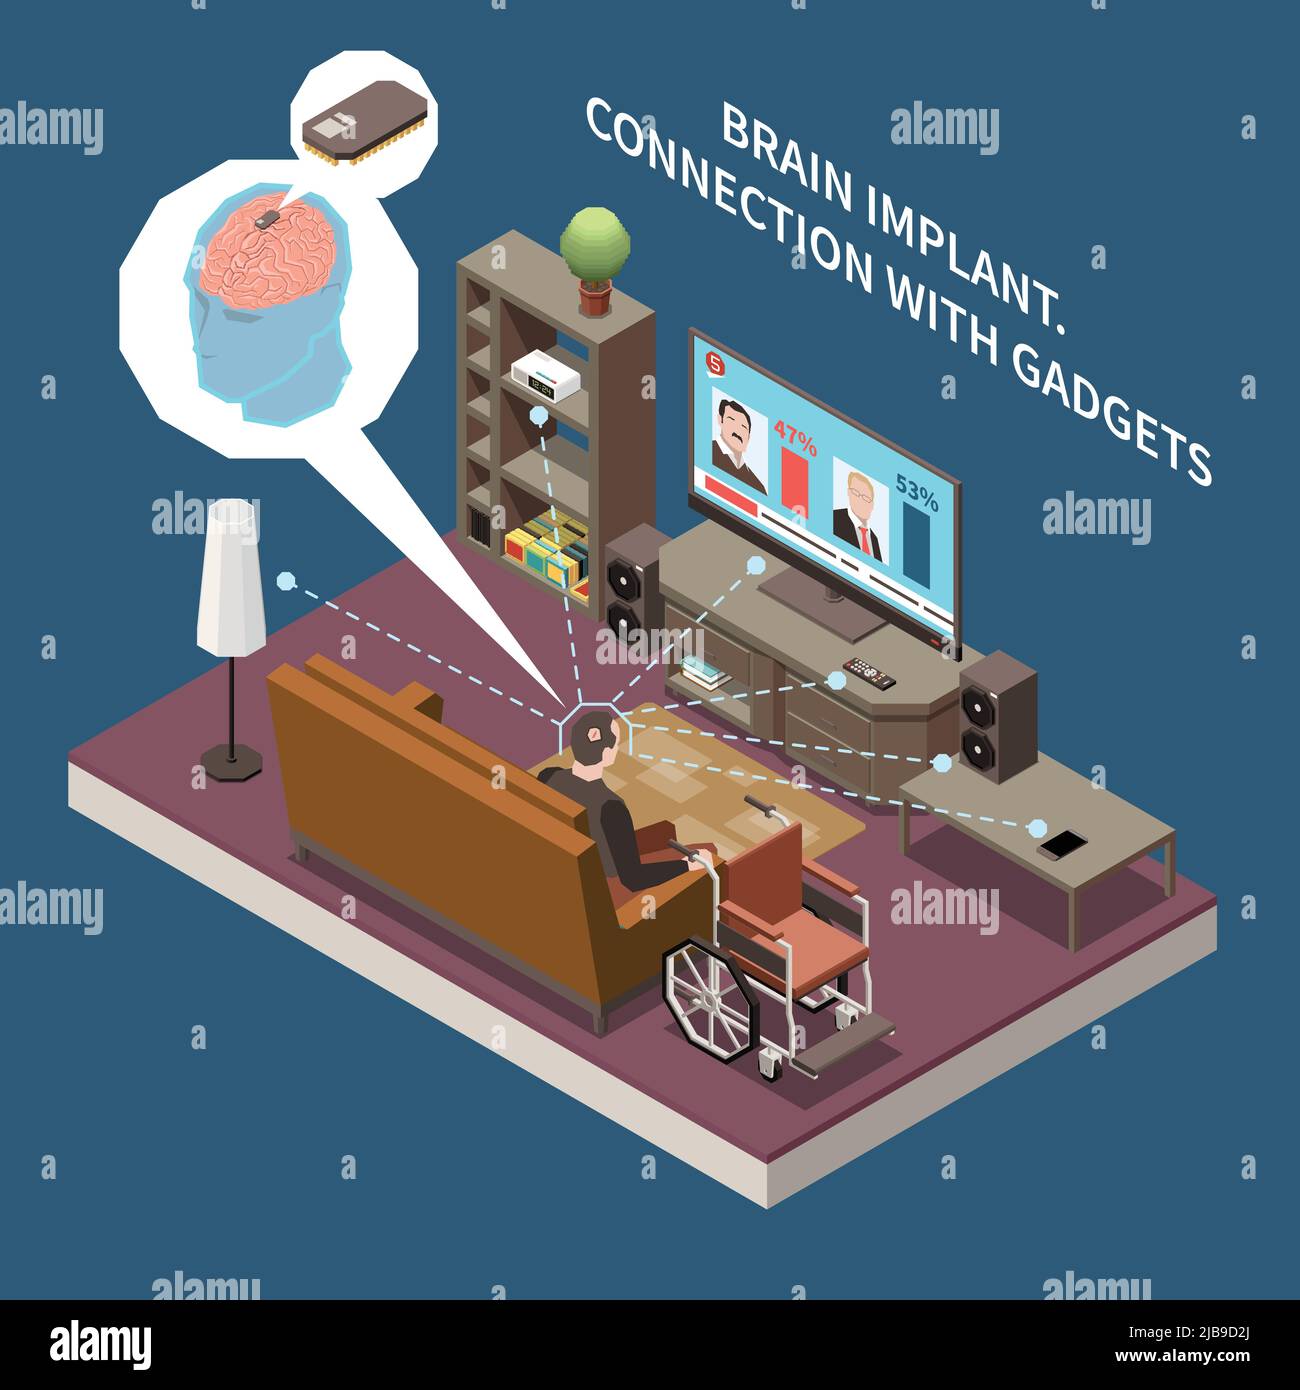 https://c8.alamy.com/comp/2JB9D2J/technology-for-disabled-people-isometric-composition-with-view-of-living-room-with-gadgets-controlled-by-brain-vector-illustration-2JB9D2J.jpg